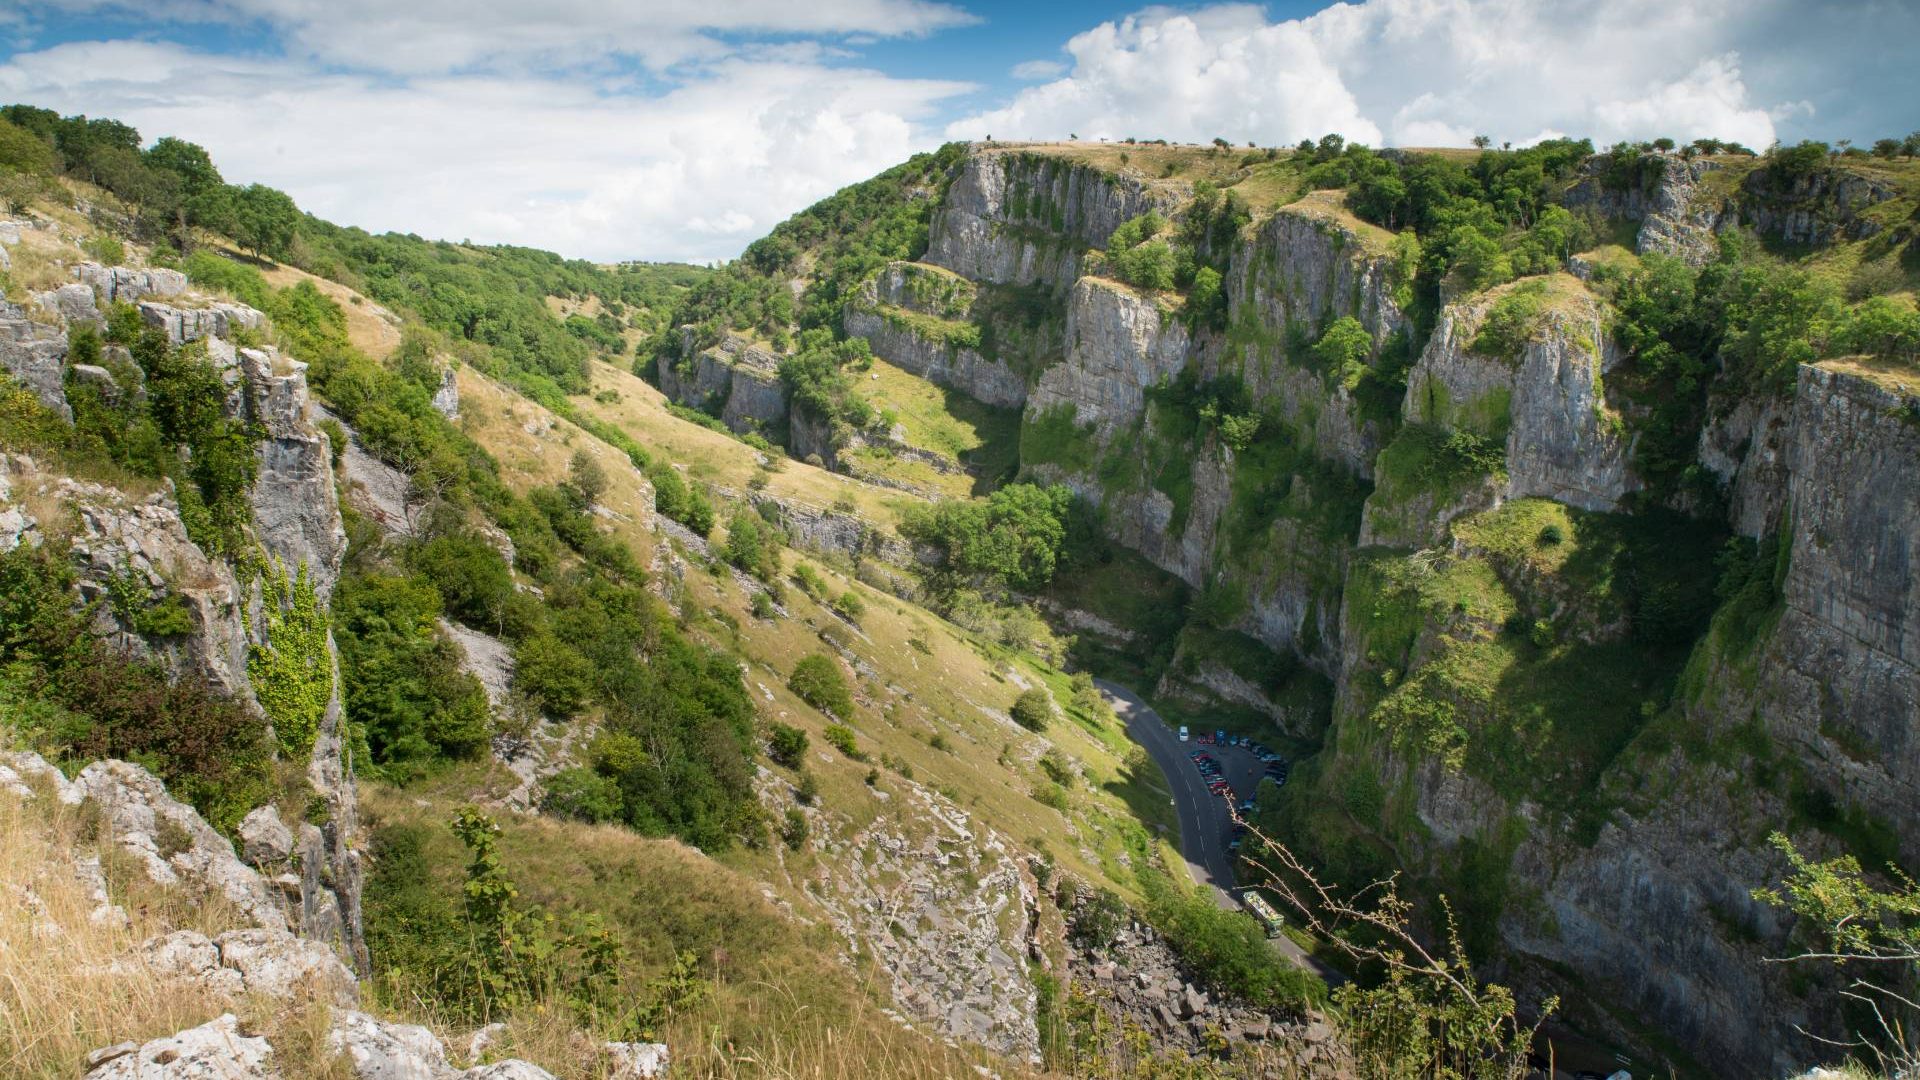 Ariel view of Cheddar Gorge rocks in Mendip Hills area in Somerset